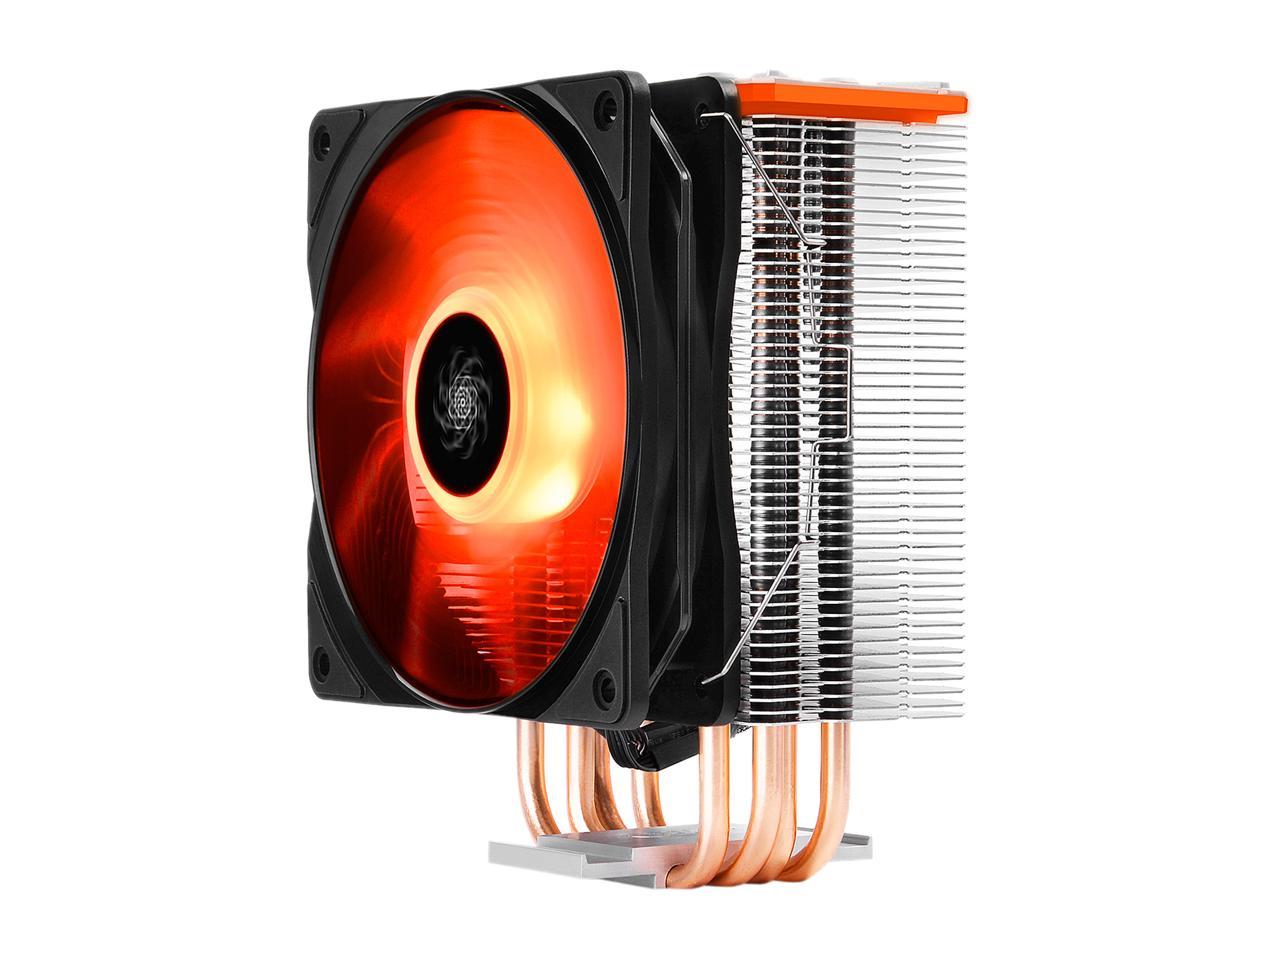 DEEPCOOL GAMMAXX GT-CPU Cooler Die-casting Top Cover Synchronized RGB Housing and Fan AURA Sync Metal Mounting Kit Support LGA 2066 / AM4